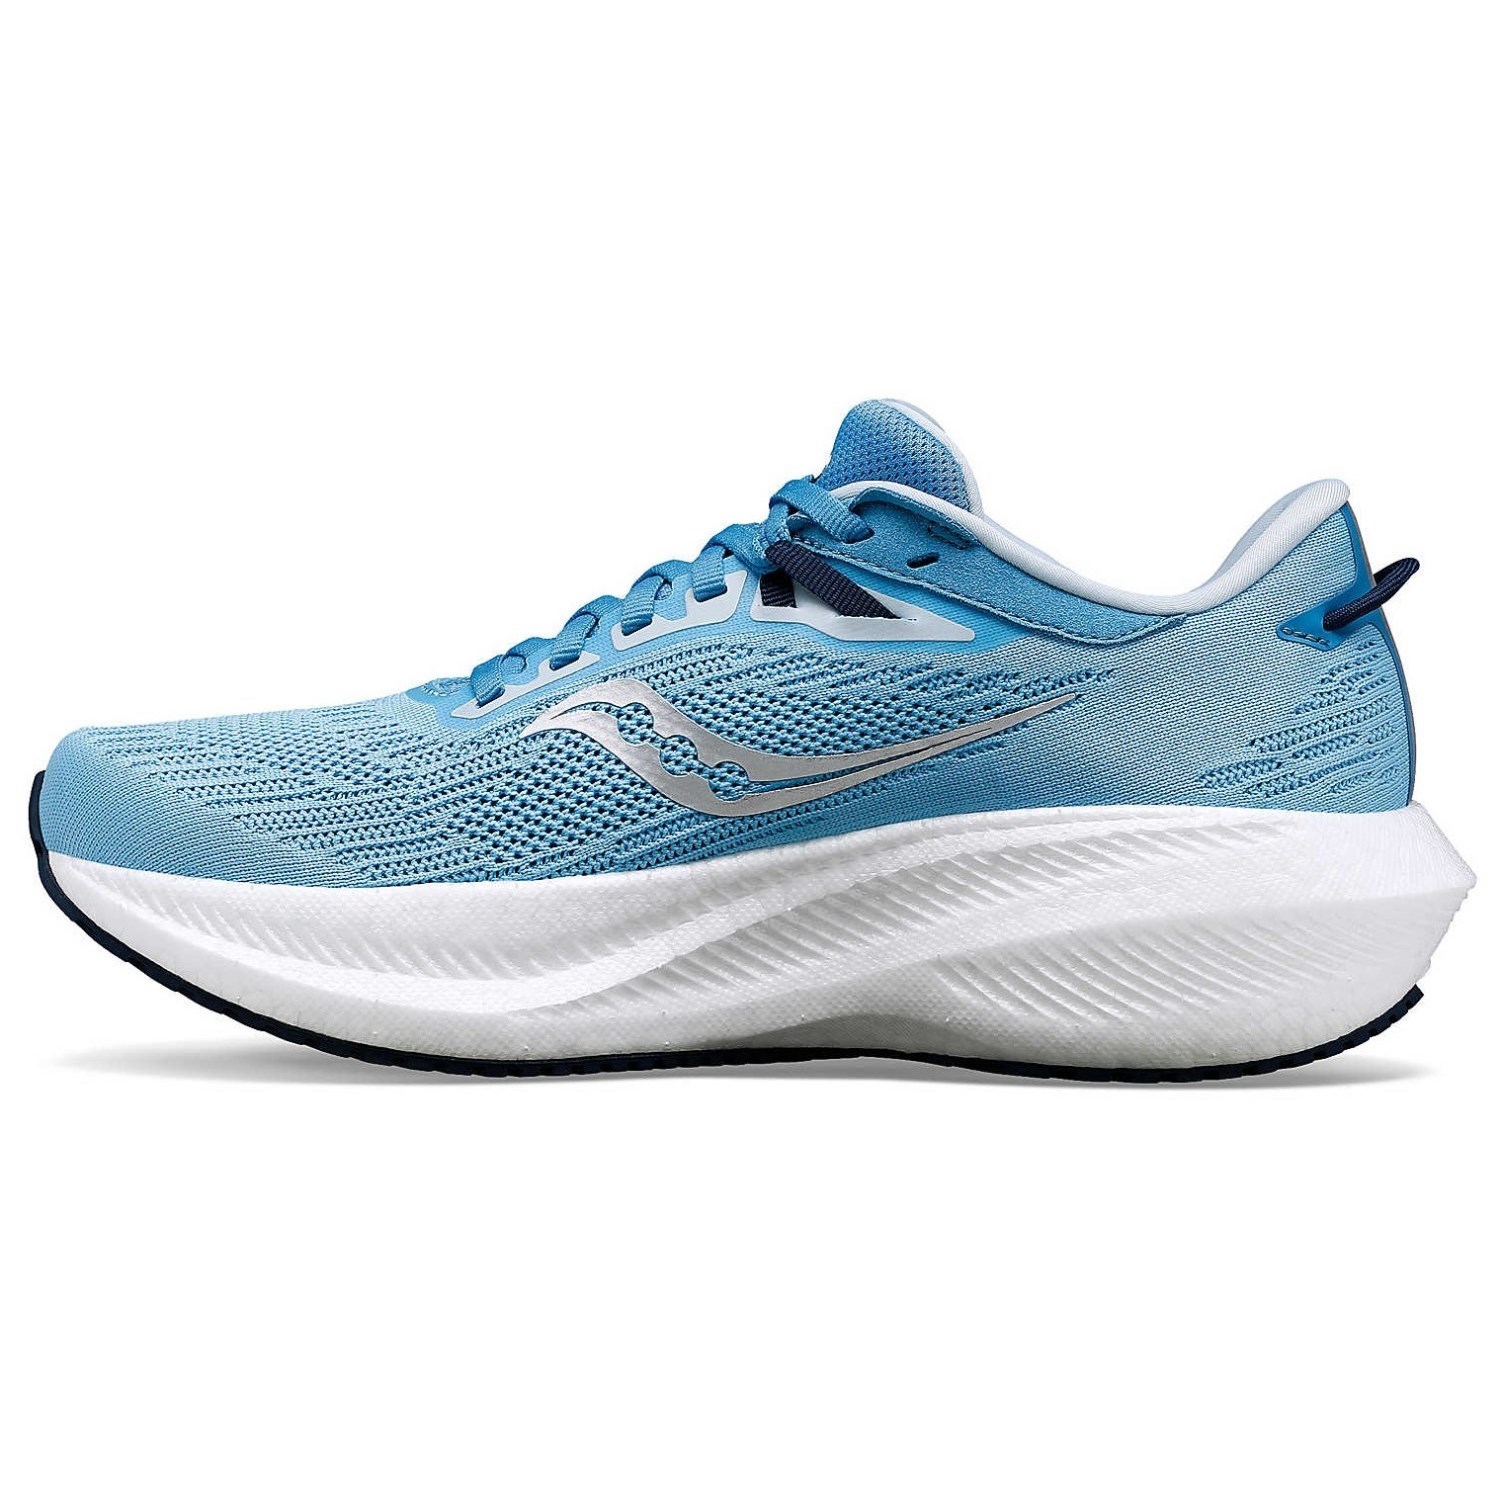 Saucony Triumph 21 - Womens Running Shoes - Breeze/Navy | Sportitude